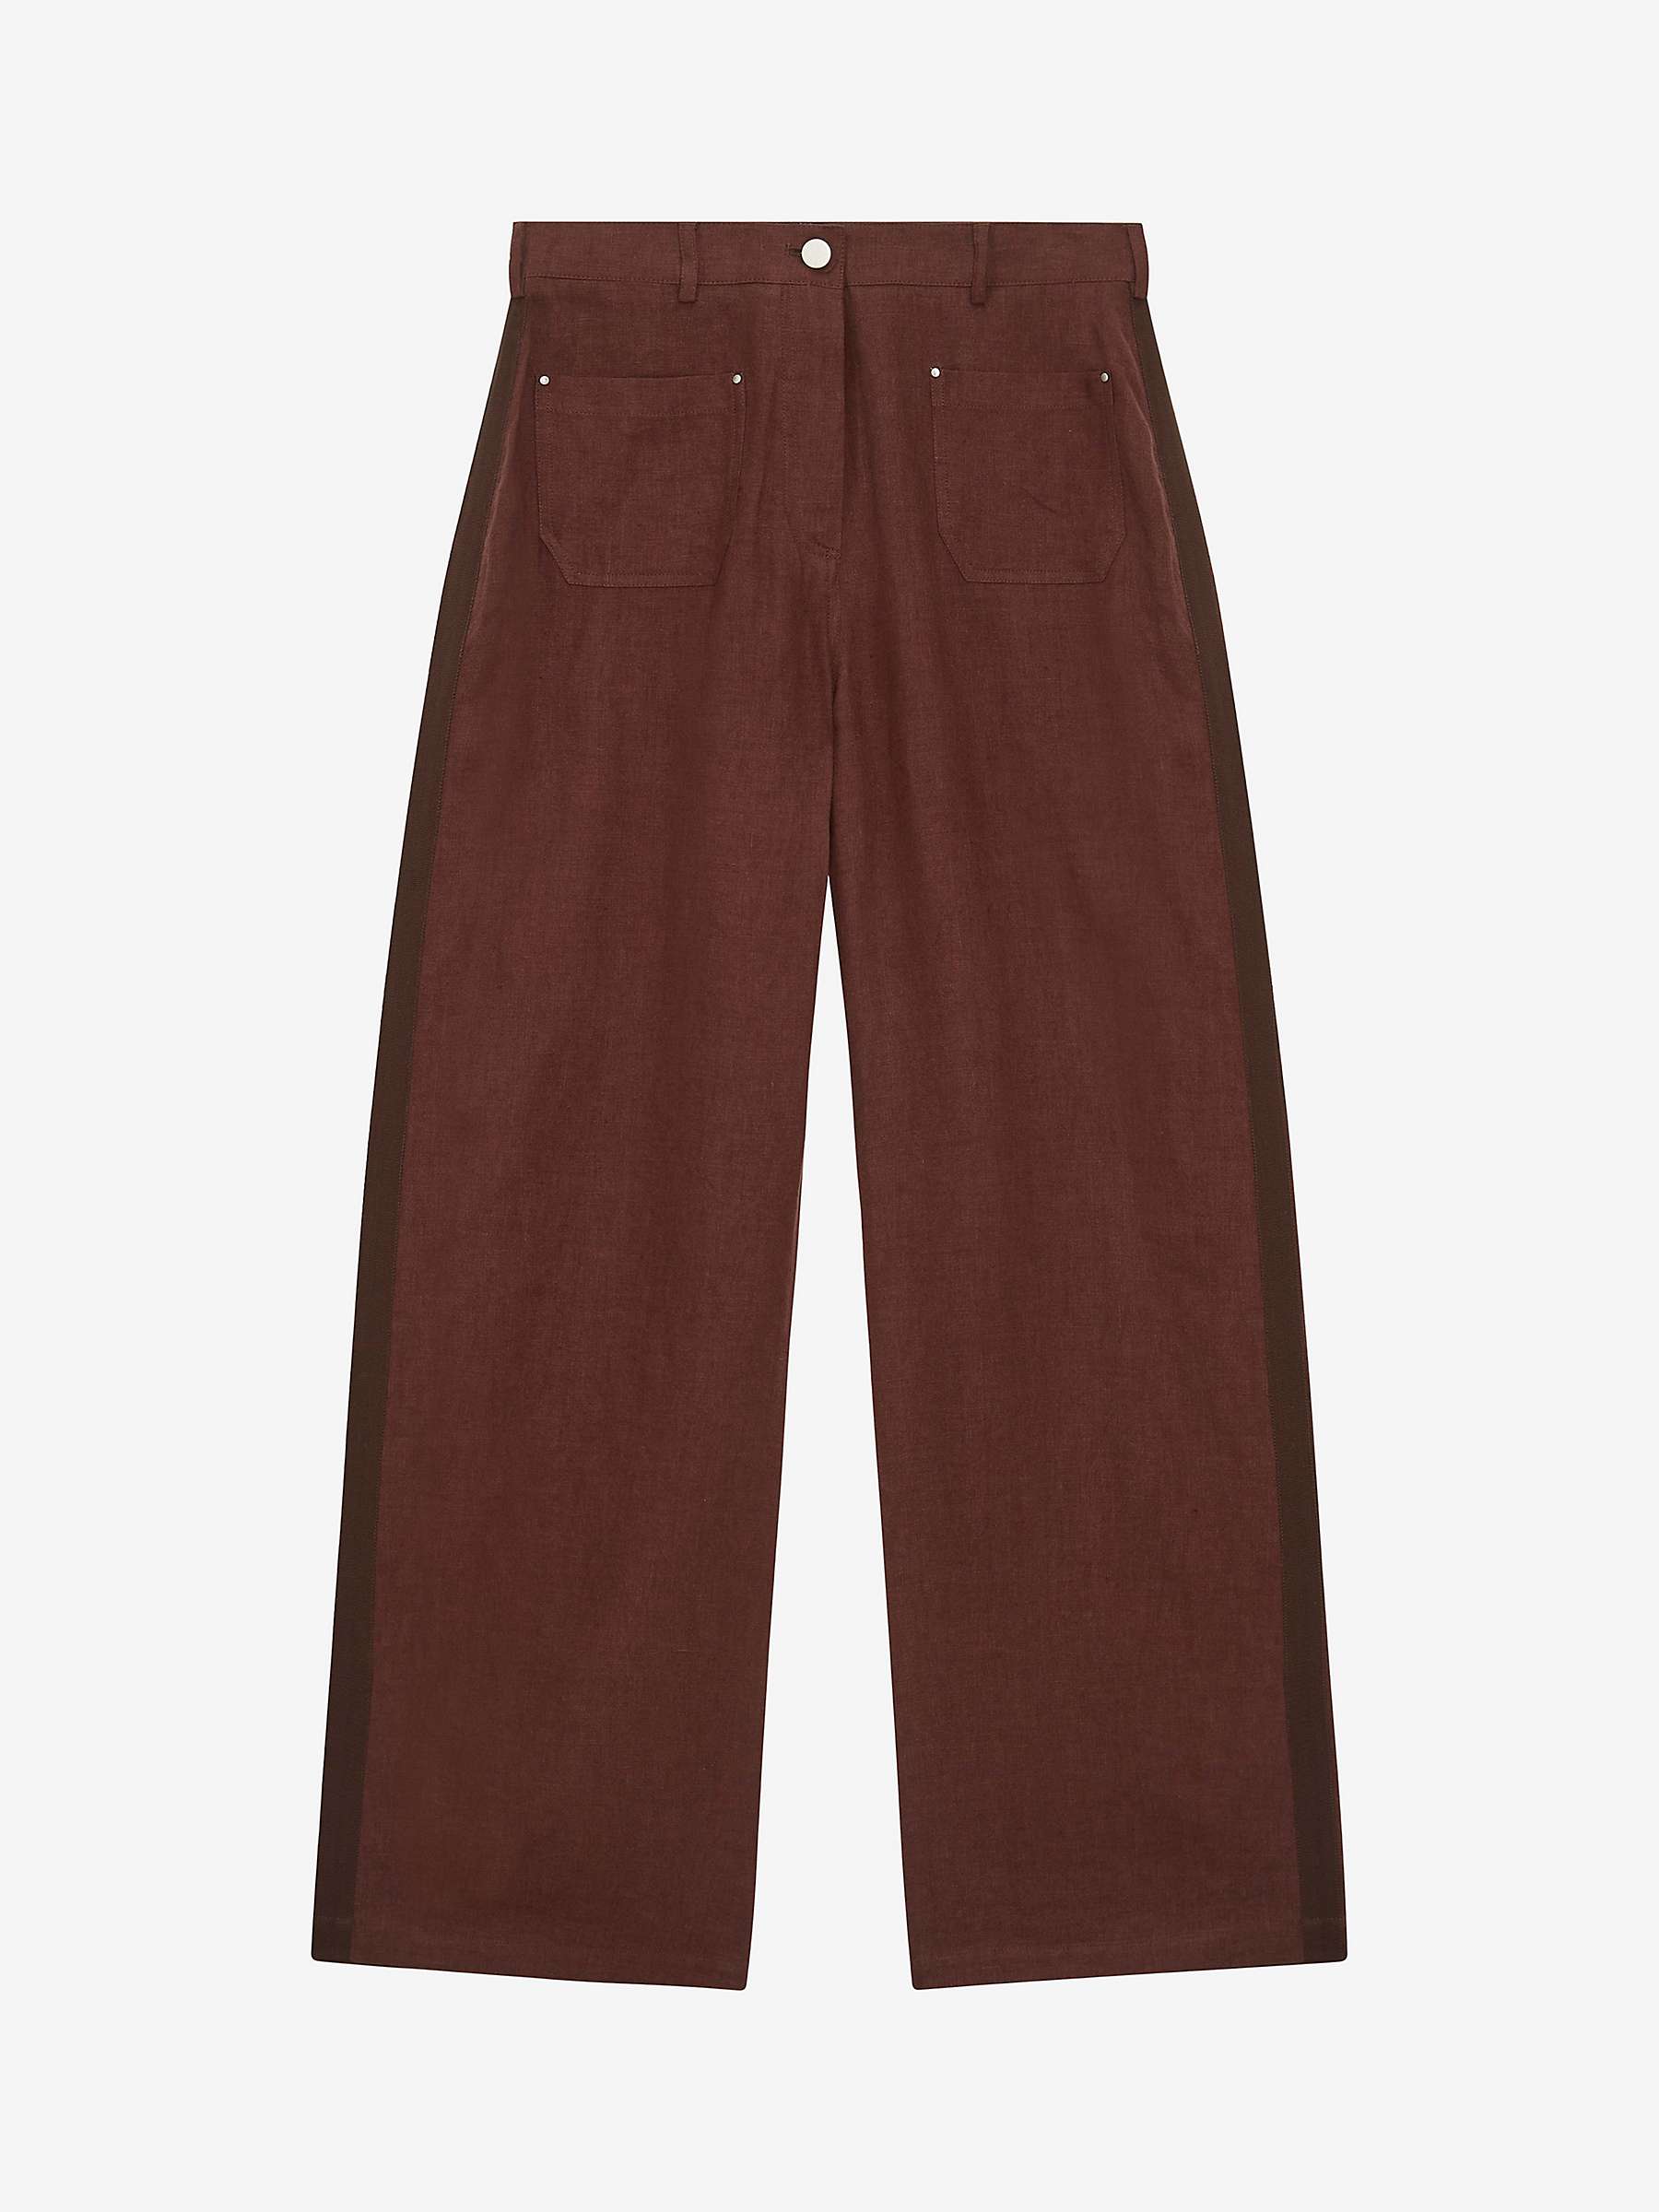 Buy Brora Wide Leg Linen Trousers, Chocolate Online at johnlewis.com